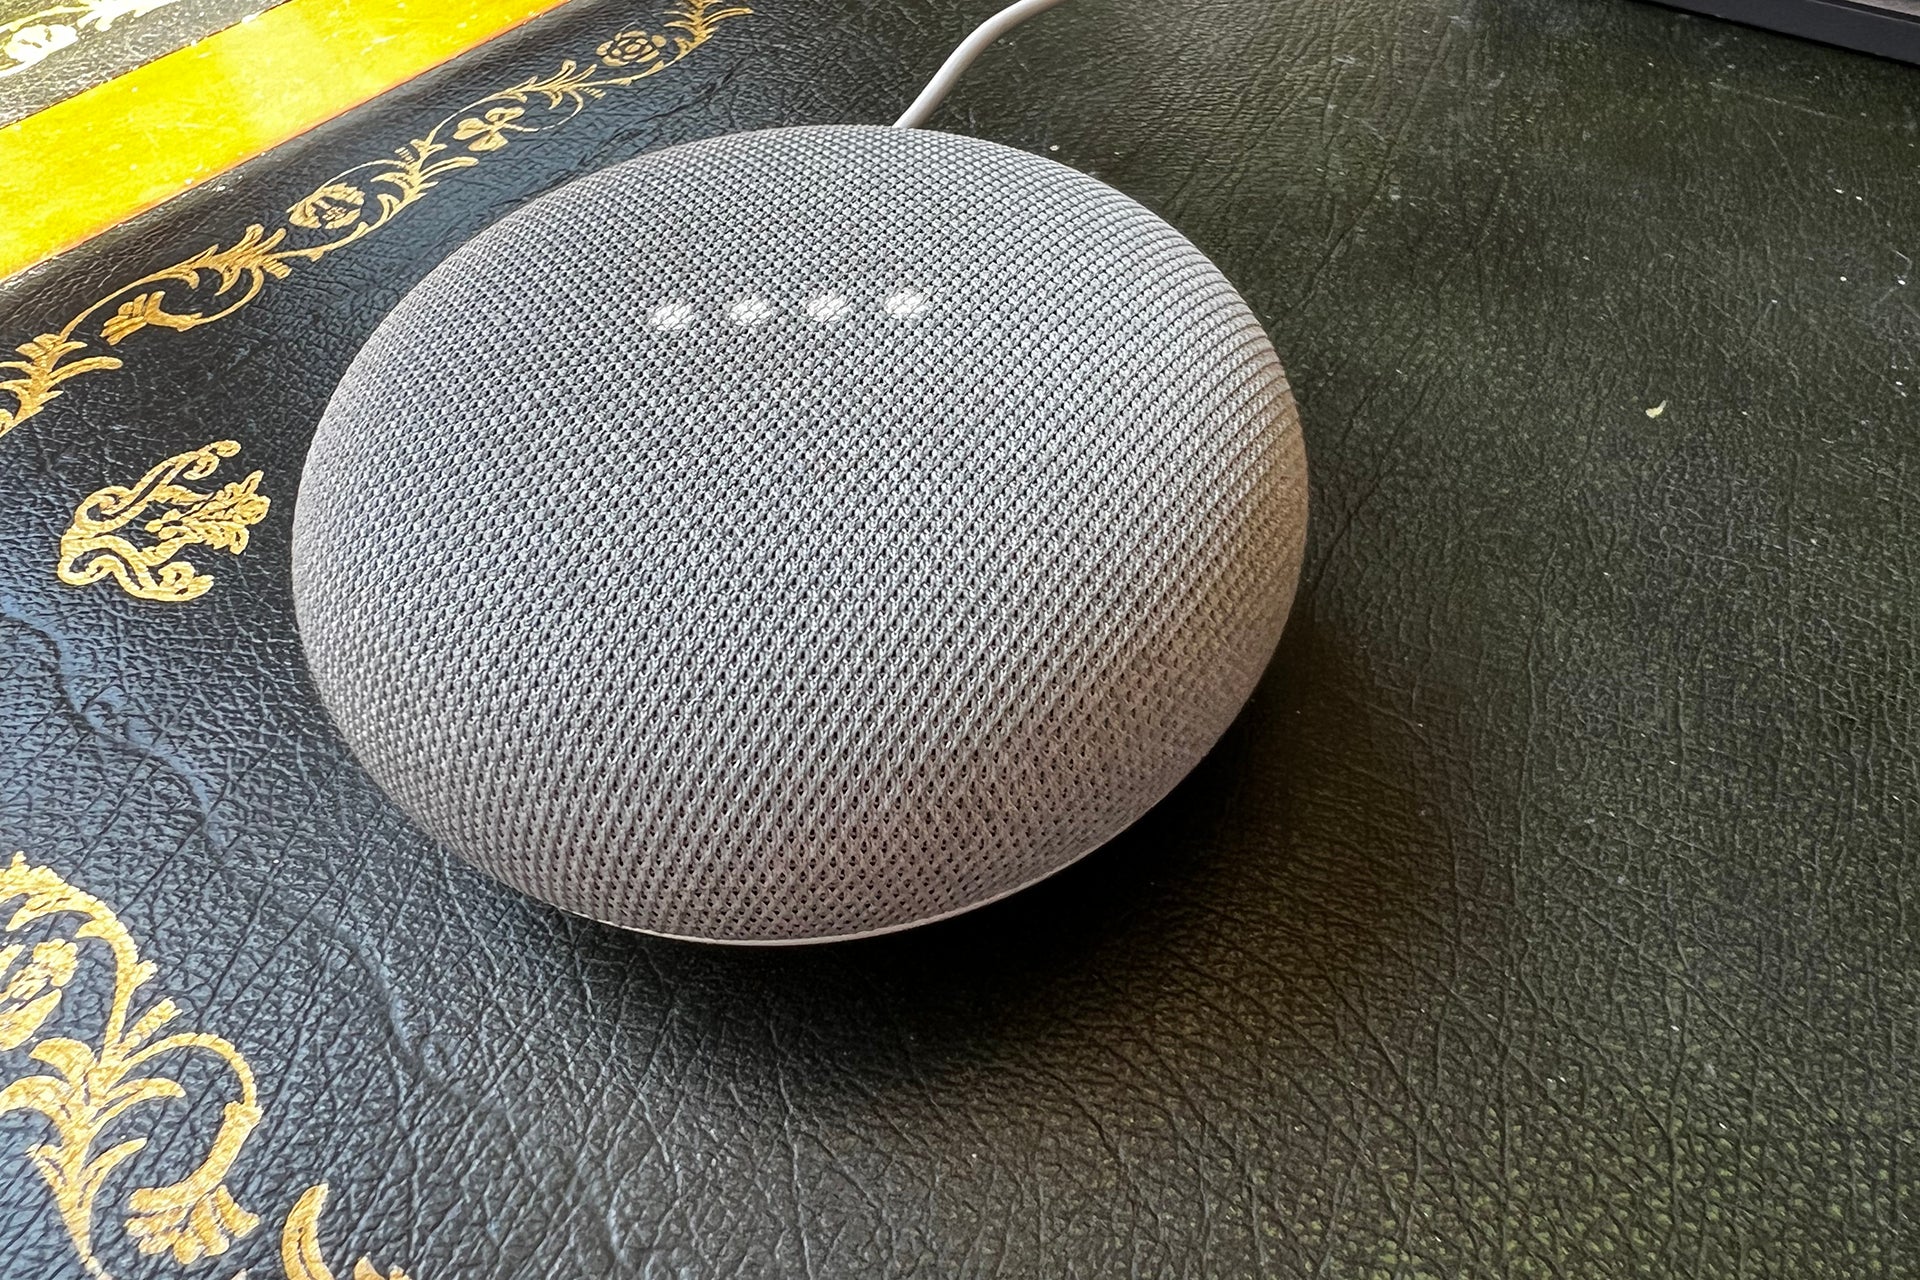 How to set up a Google Home Mini or Nest Mini | Trusted Reviews